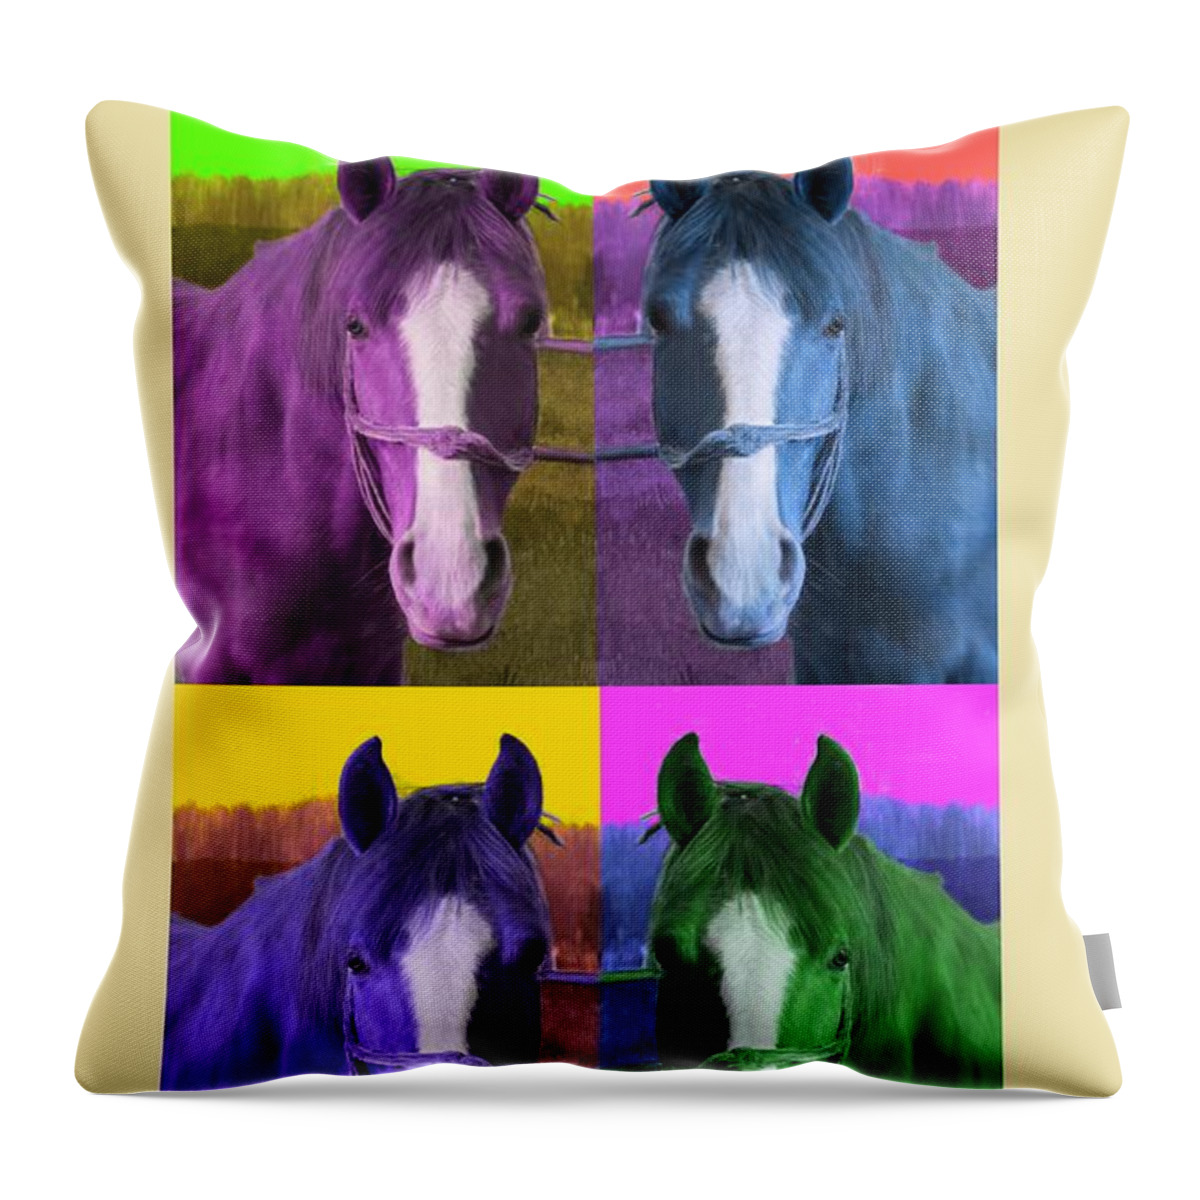 Horses Throw Pillow featuring the painting Horse of a Different Color by Bruce Nutting